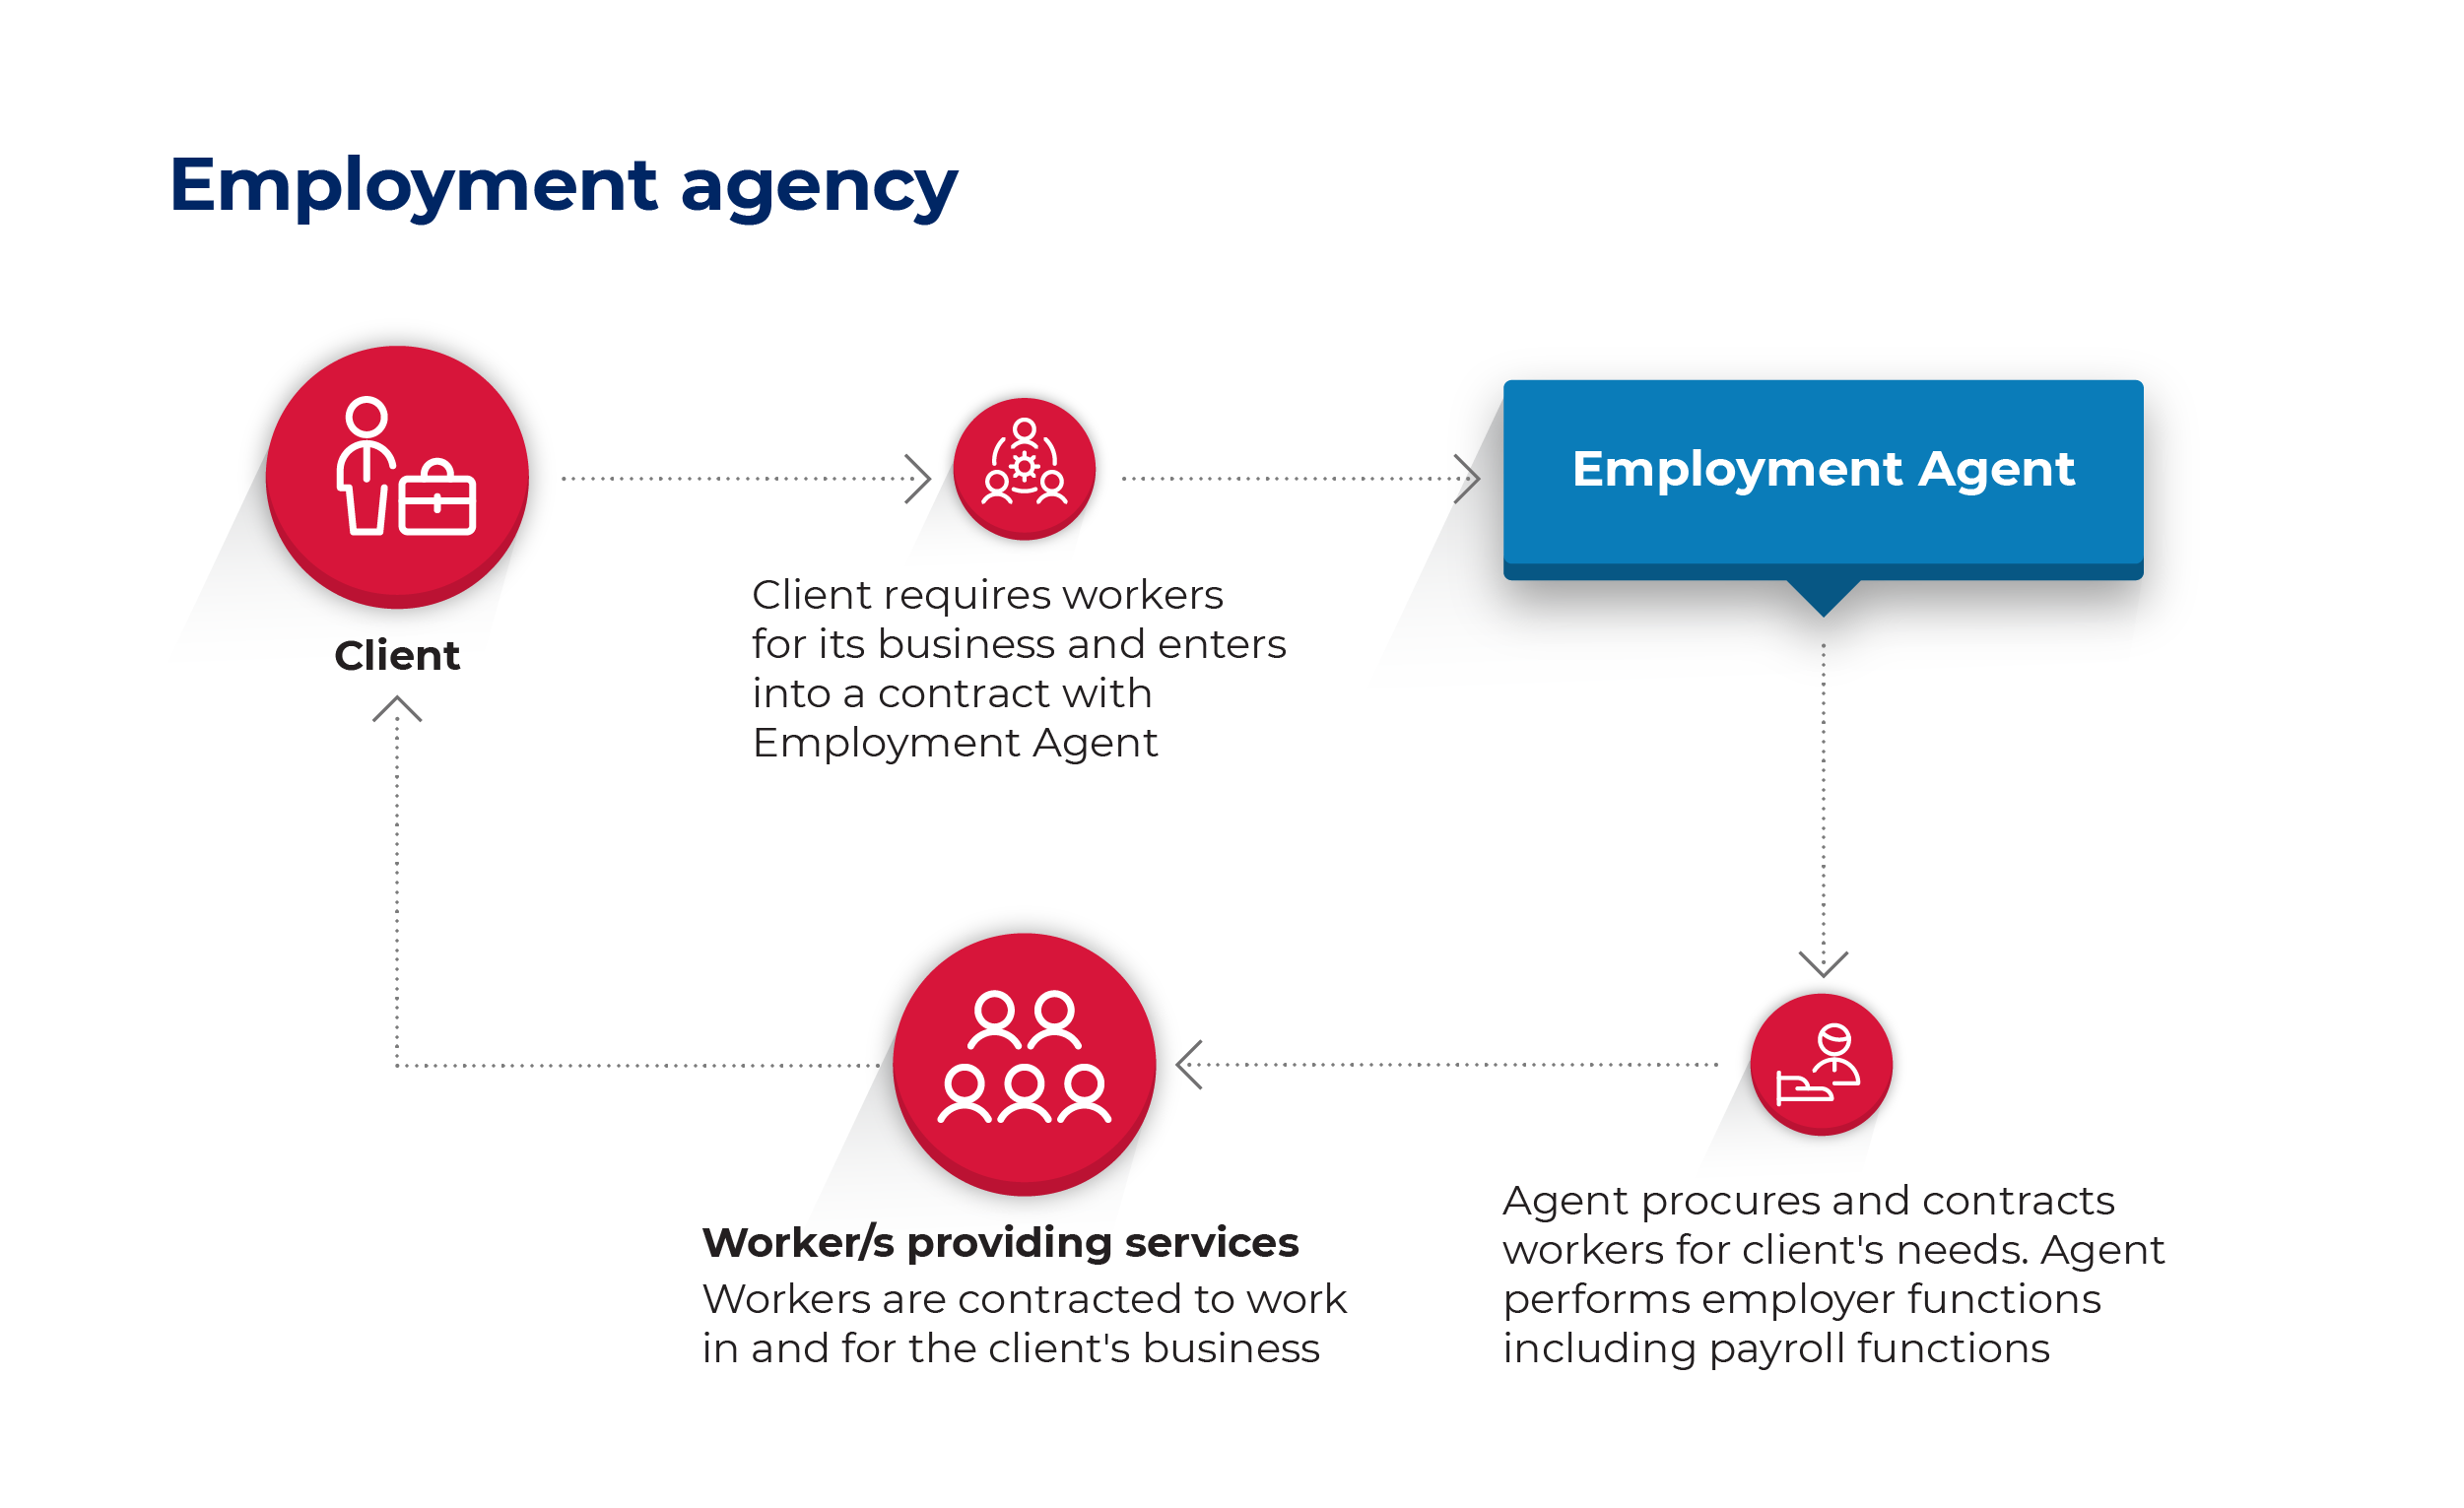 Image showing the Employment agency lifecycle